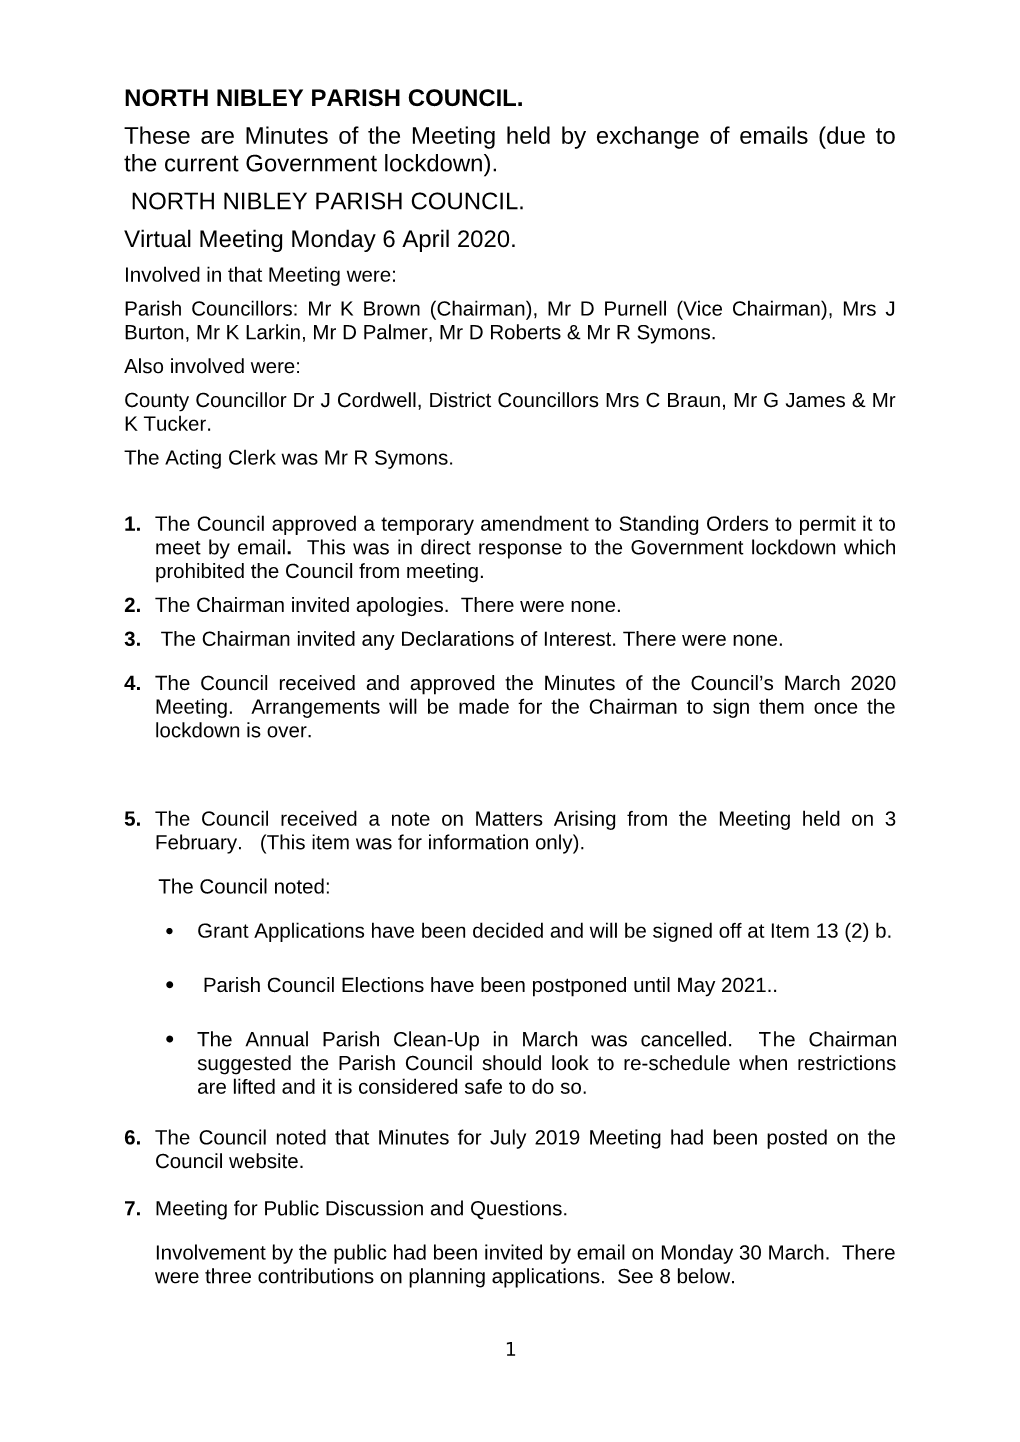 NORTH NIBLEY PARISH COUNCIL. These Are Minutes of the Meeting Held by Exchange of Emails (Due to the Current Government Lockdown)